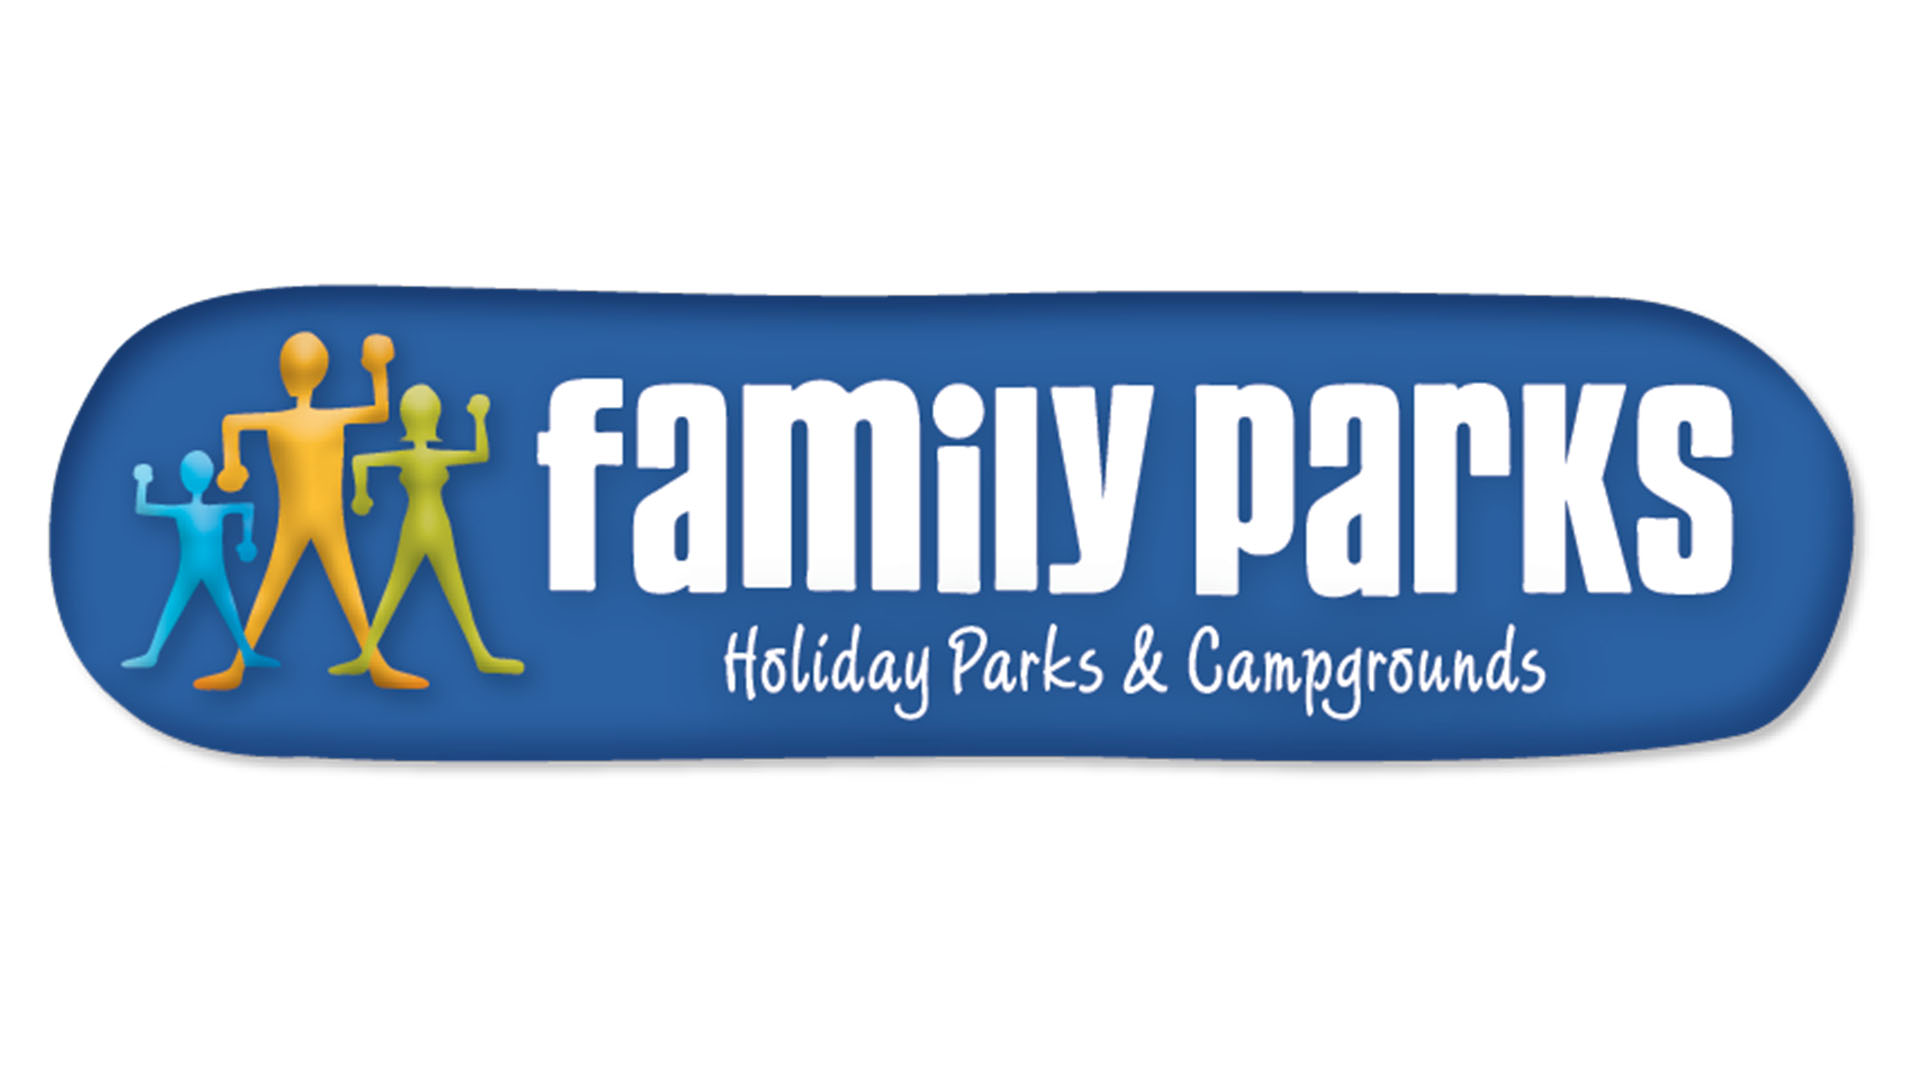 Family parks - Holiday Parks and Campgrounds